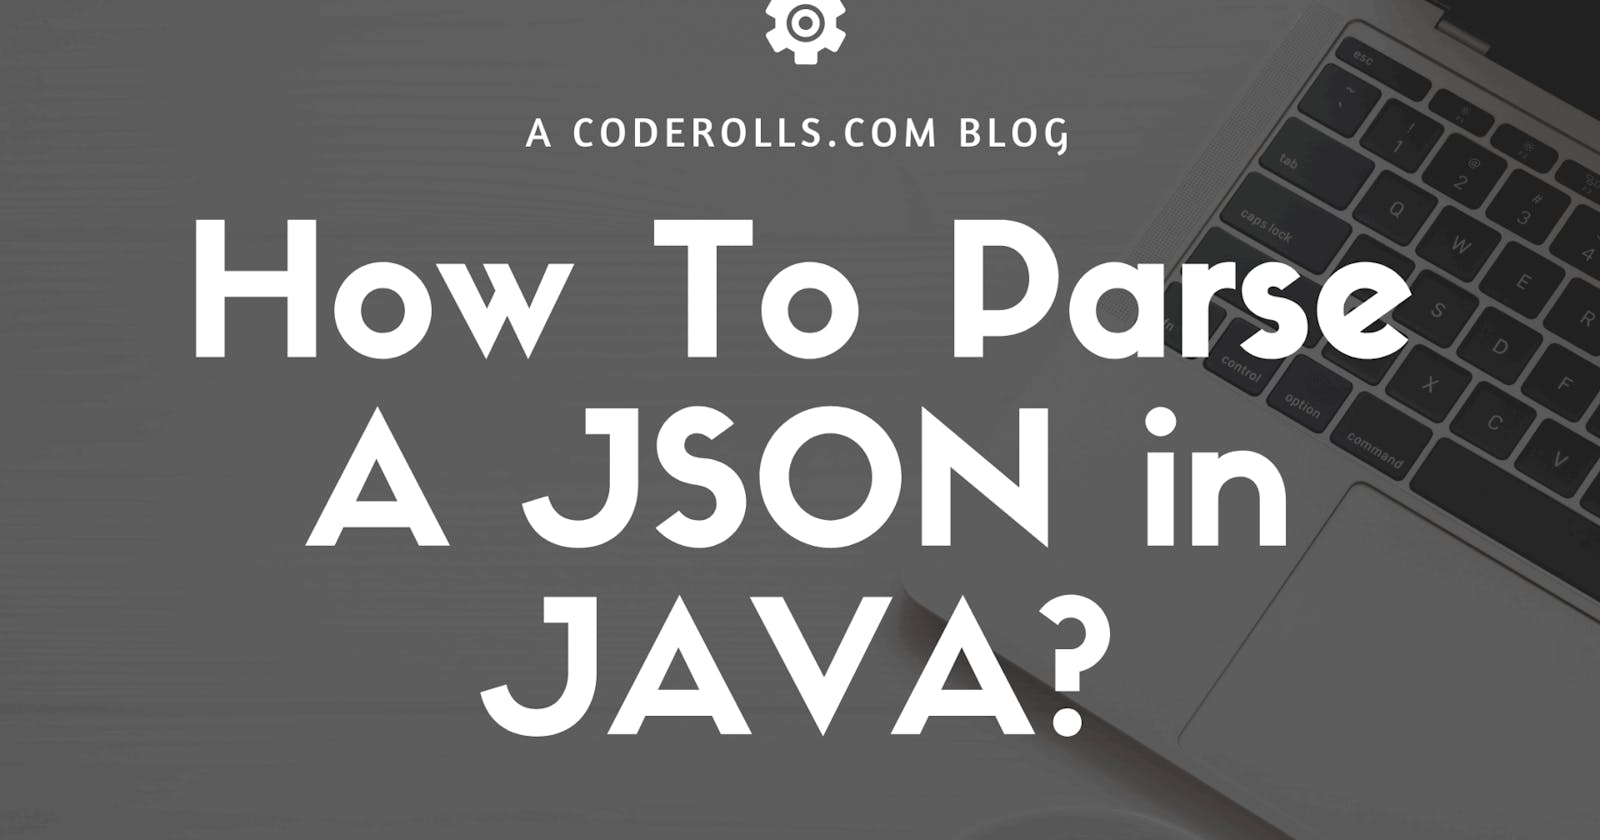 How To Parse JSON In Java?